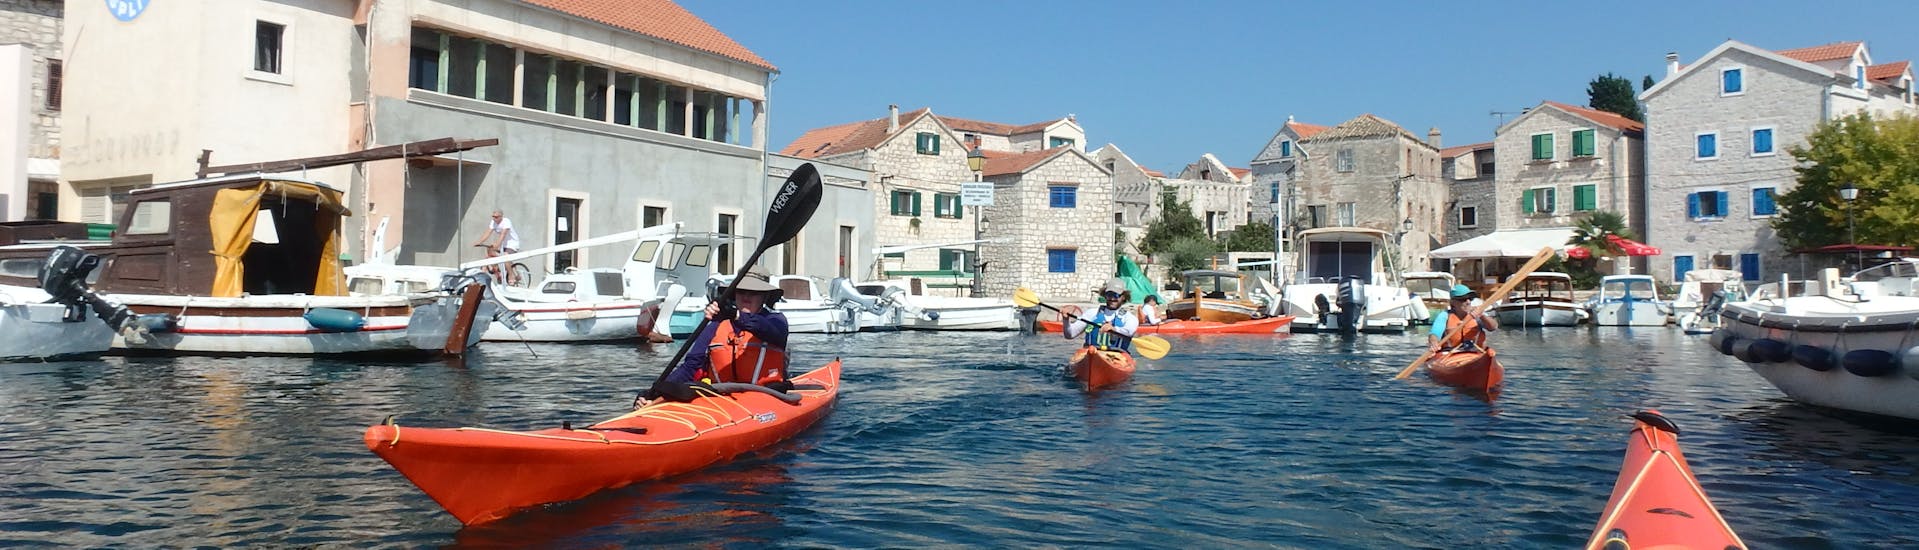 Participants of the Island Hopping Sea Kayak Tour from Zlarin - Full Day enjoying the tour on the water.